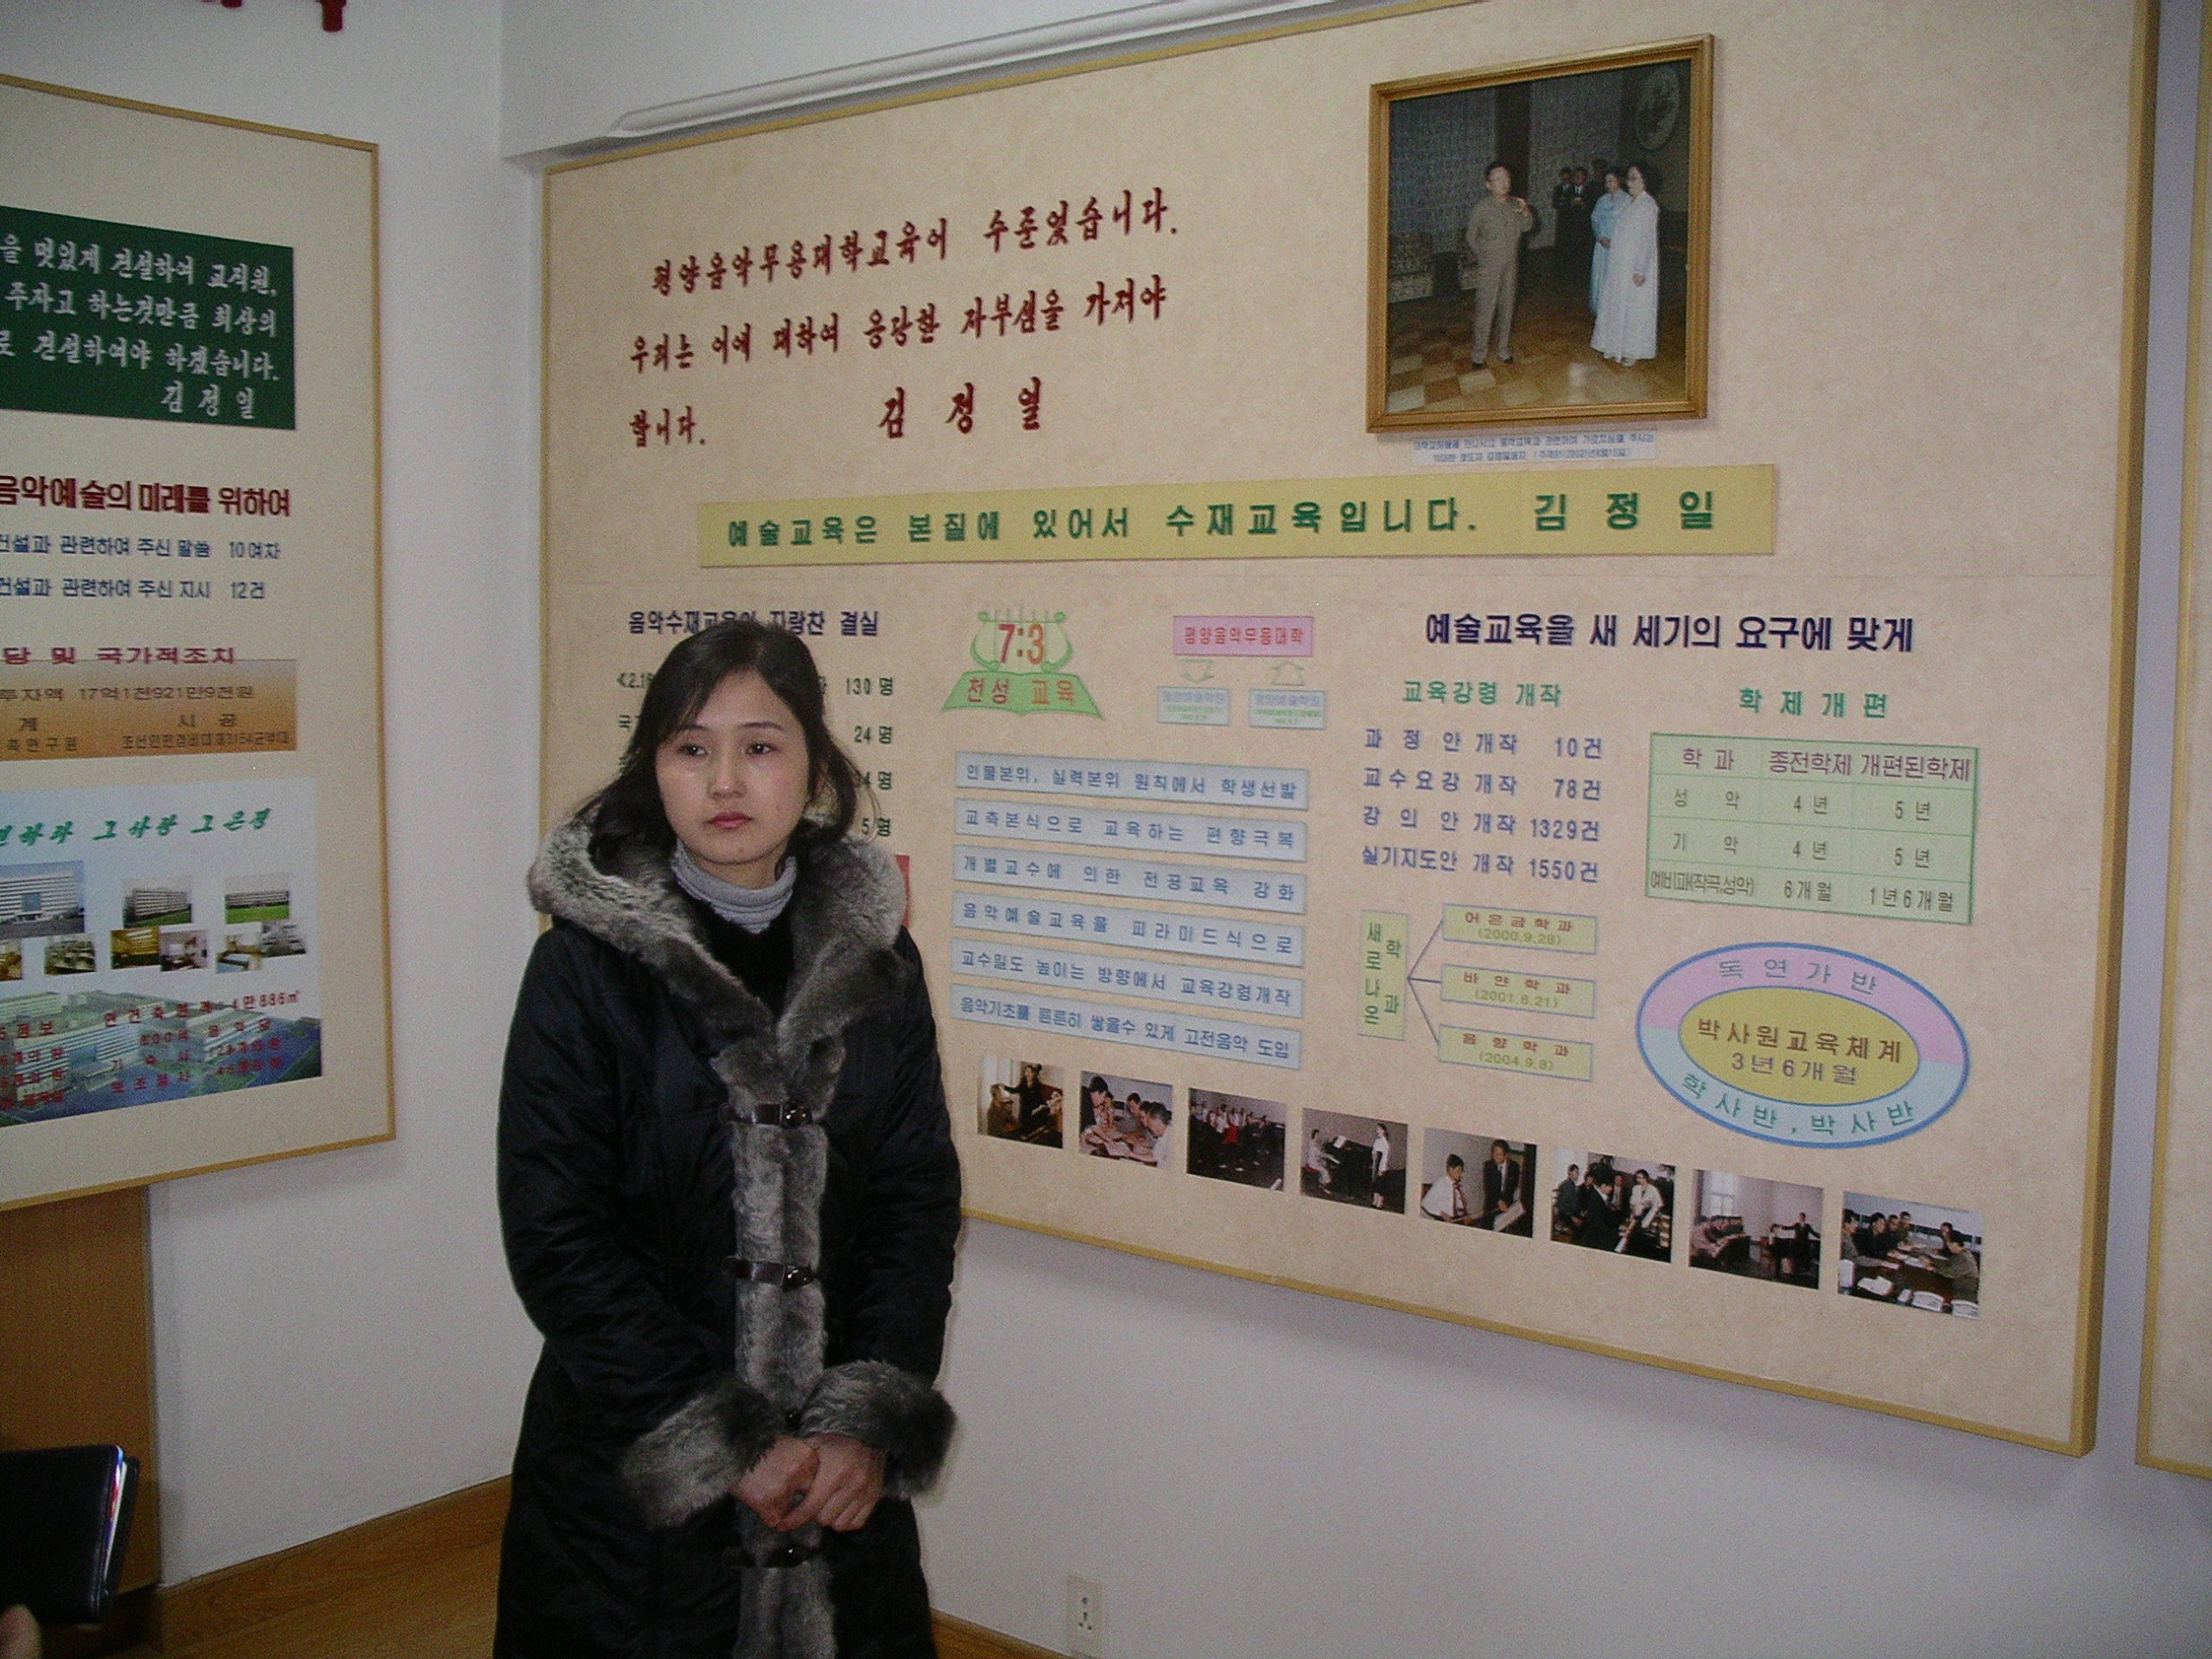 A museum guide (young woman) standing in front of a poster narrating the life of Kim Jong Il